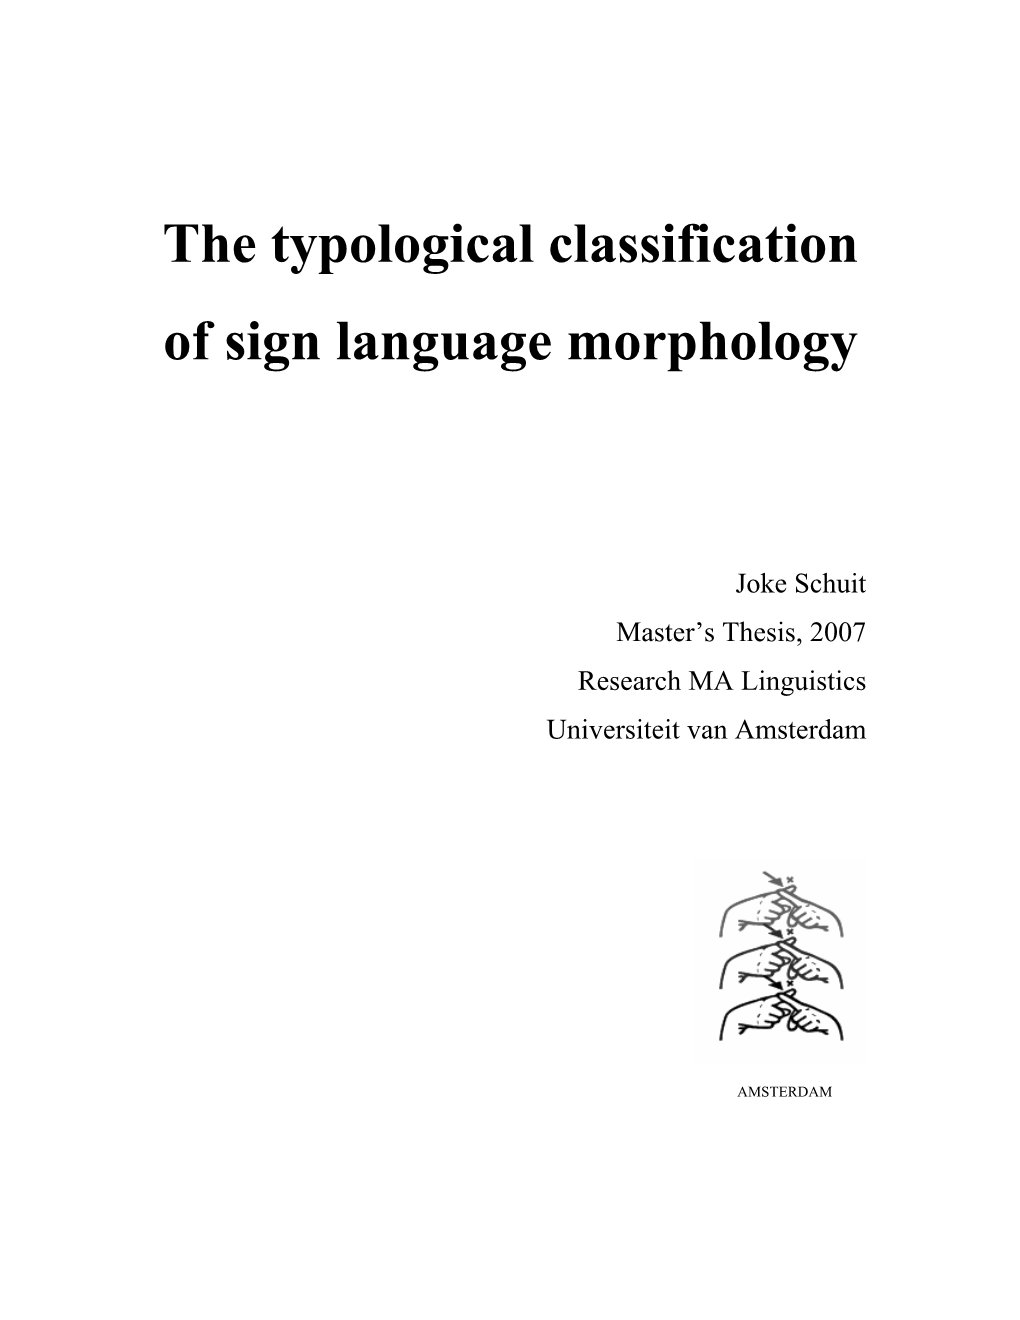 The Typological Classification of Sign Language Morphology